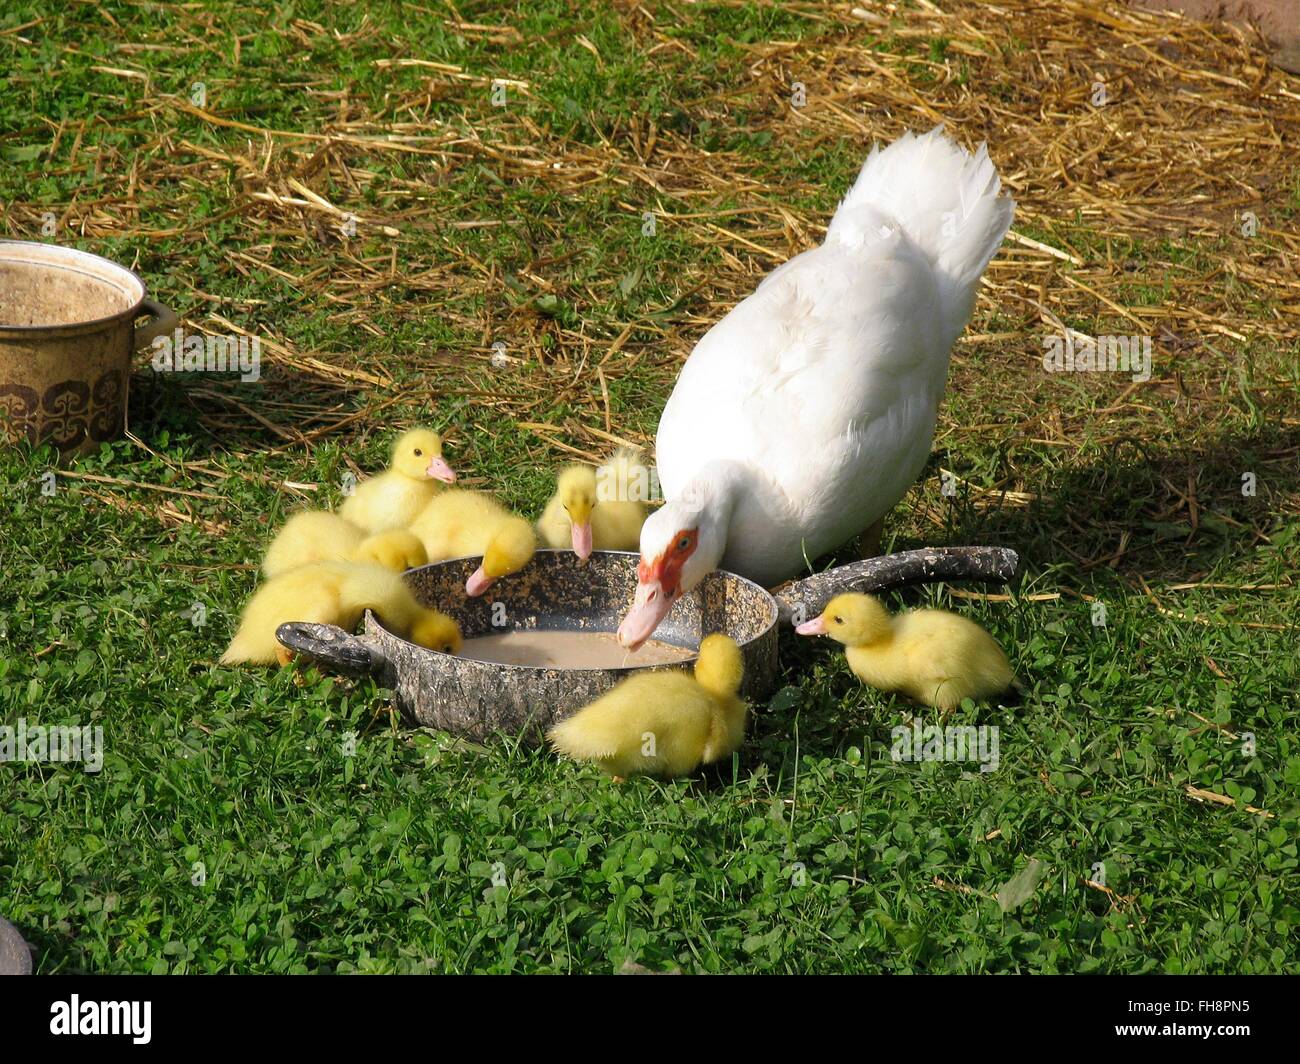 A mother duck with her ducklings. Warts ducks have a particularly fine and lean meat. They can fly well if they are not restrained. Michelsrombach, Hesse, Germany, Europe Date: June 23, 2012 Stock Photo